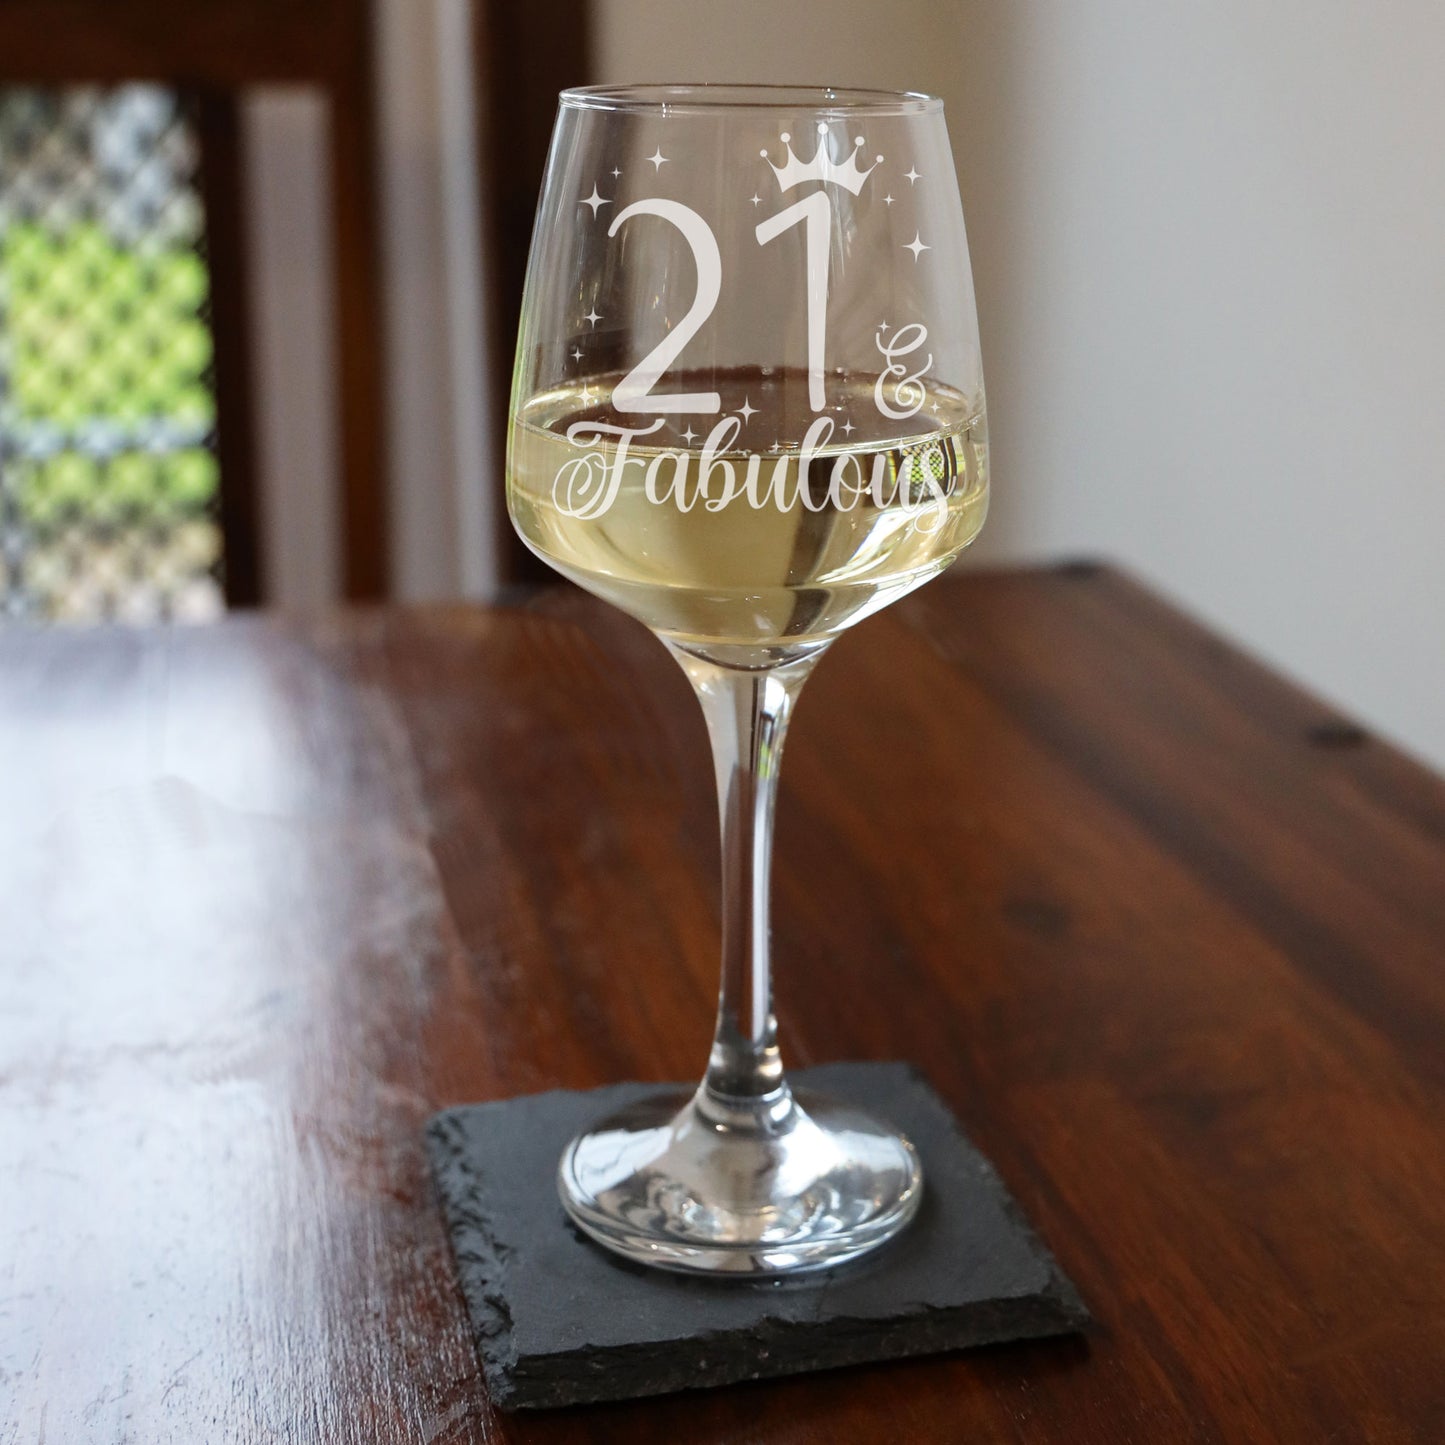 21 & Fabulous 21st Birthday Gift Engraved Wine Glass and/or Coaster Set  - Always Looking Good - Wine Glass Only  